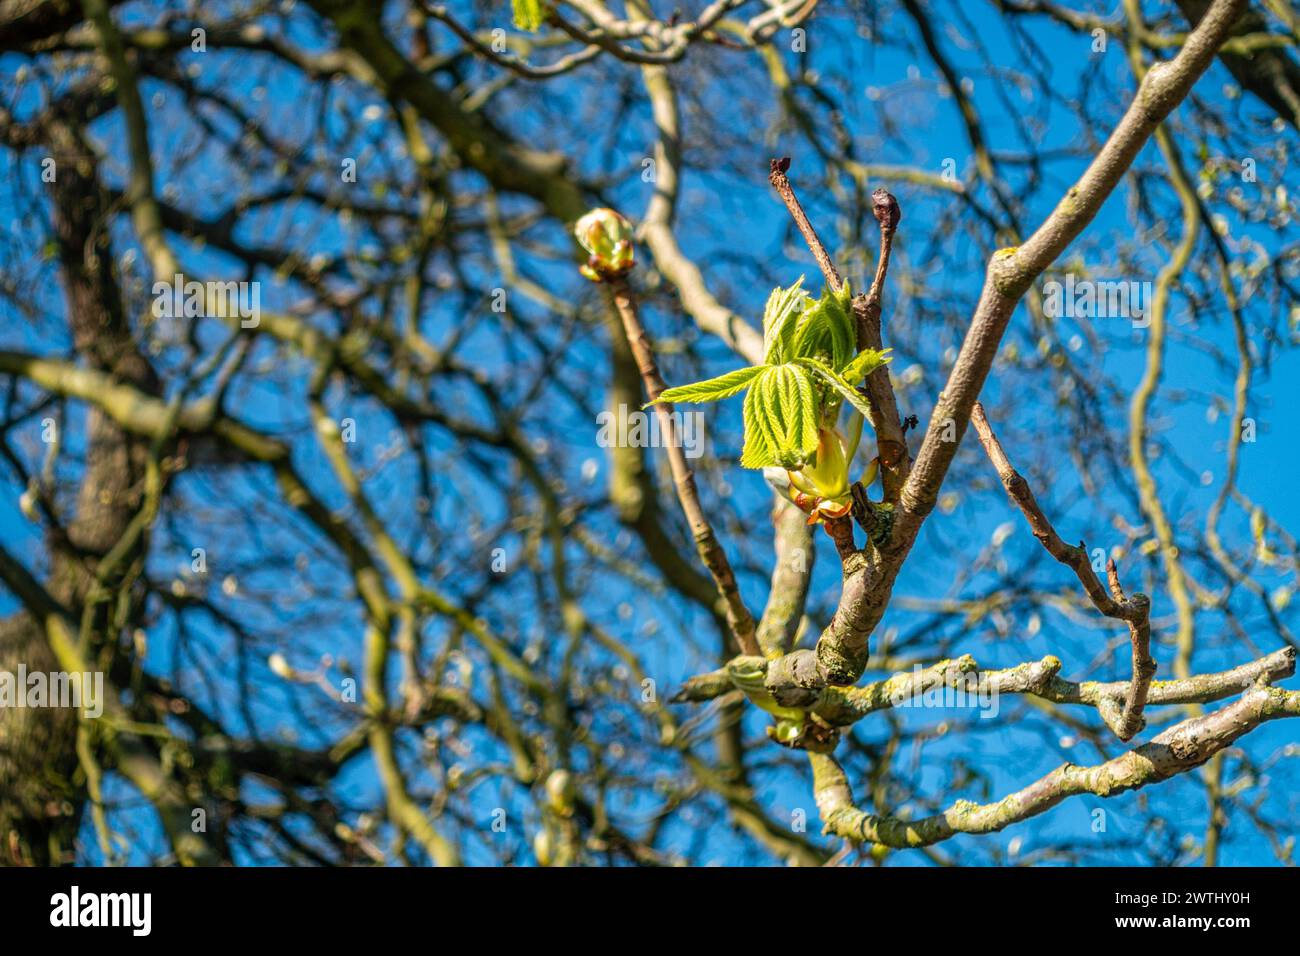 Close up view of leaf buds on a tree starting to burst open in early spring seen against a blue sky. Stock Photo